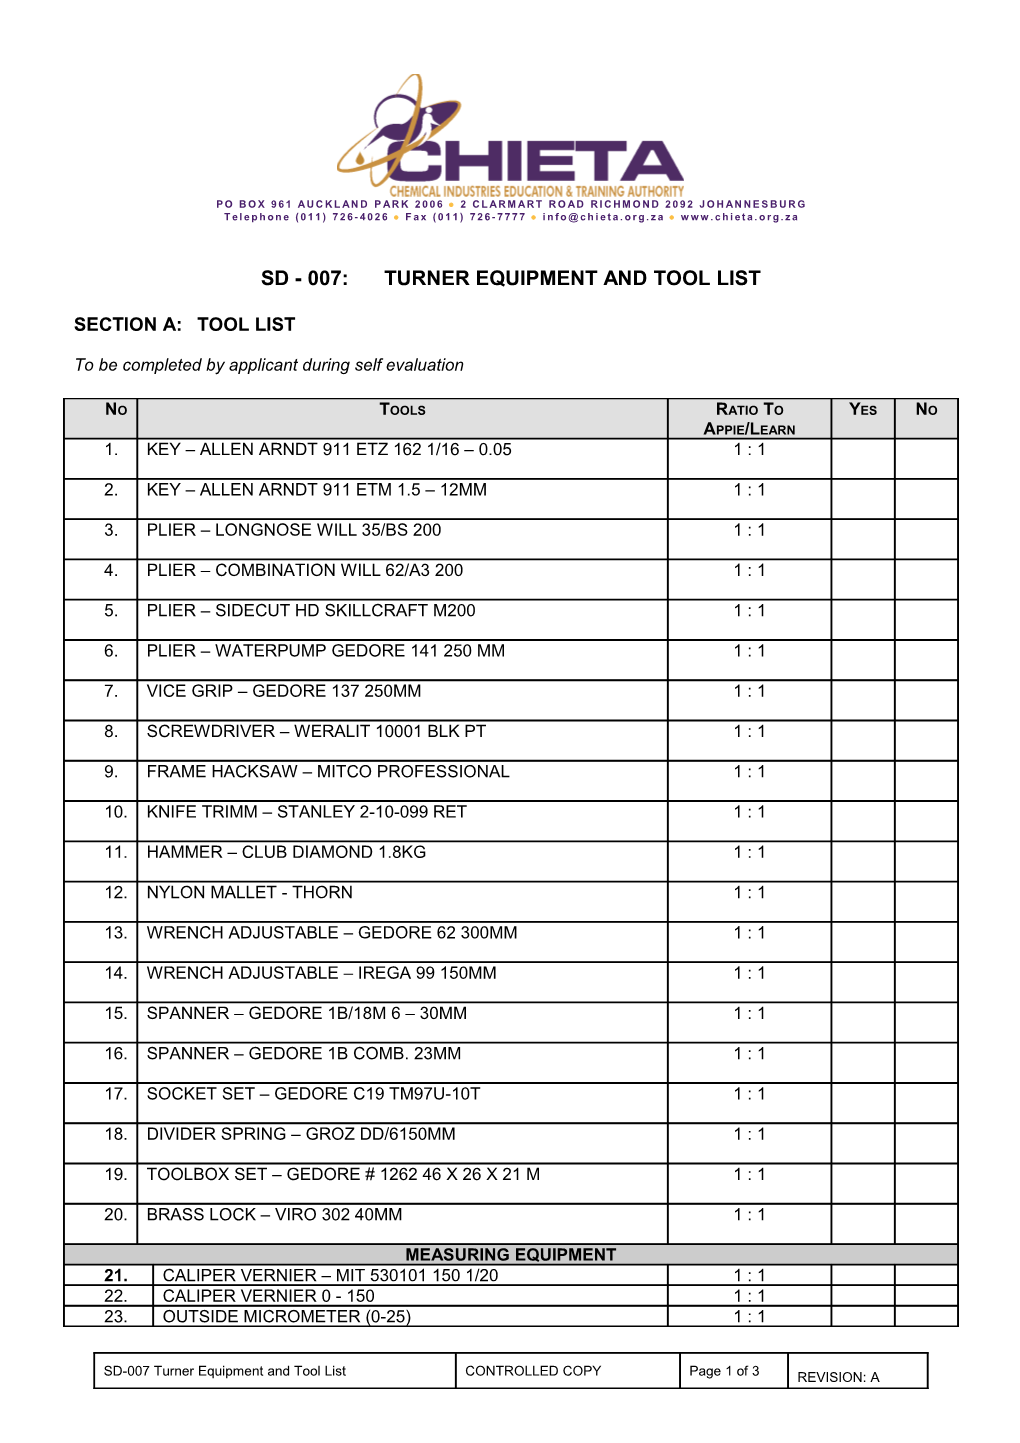 Sd - 007:Turner Equipment and Tool List